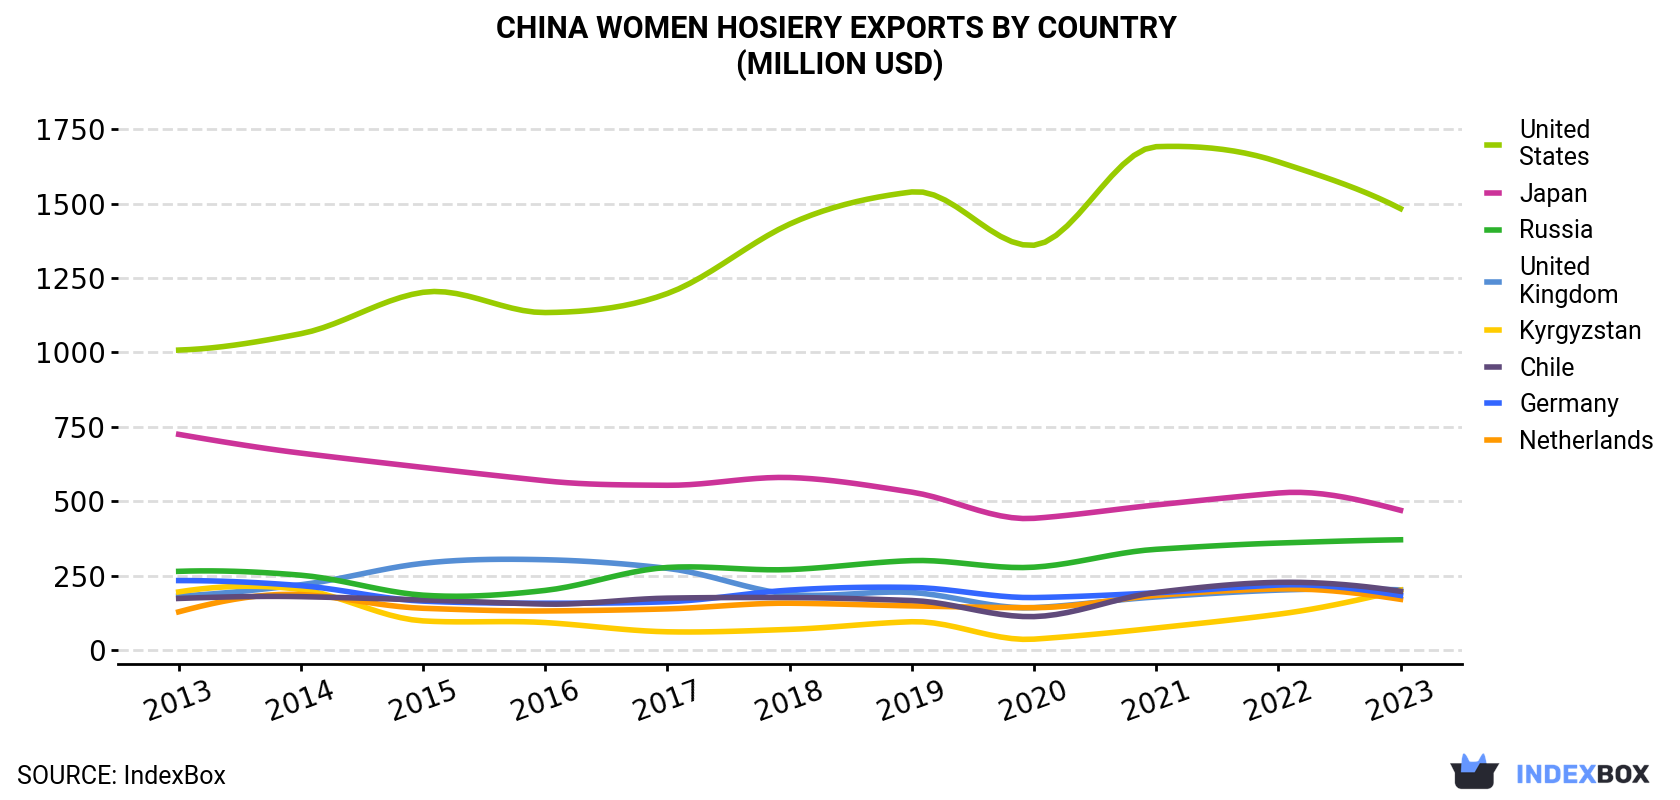 China Women Hosiery Exports By Country (Million USD)